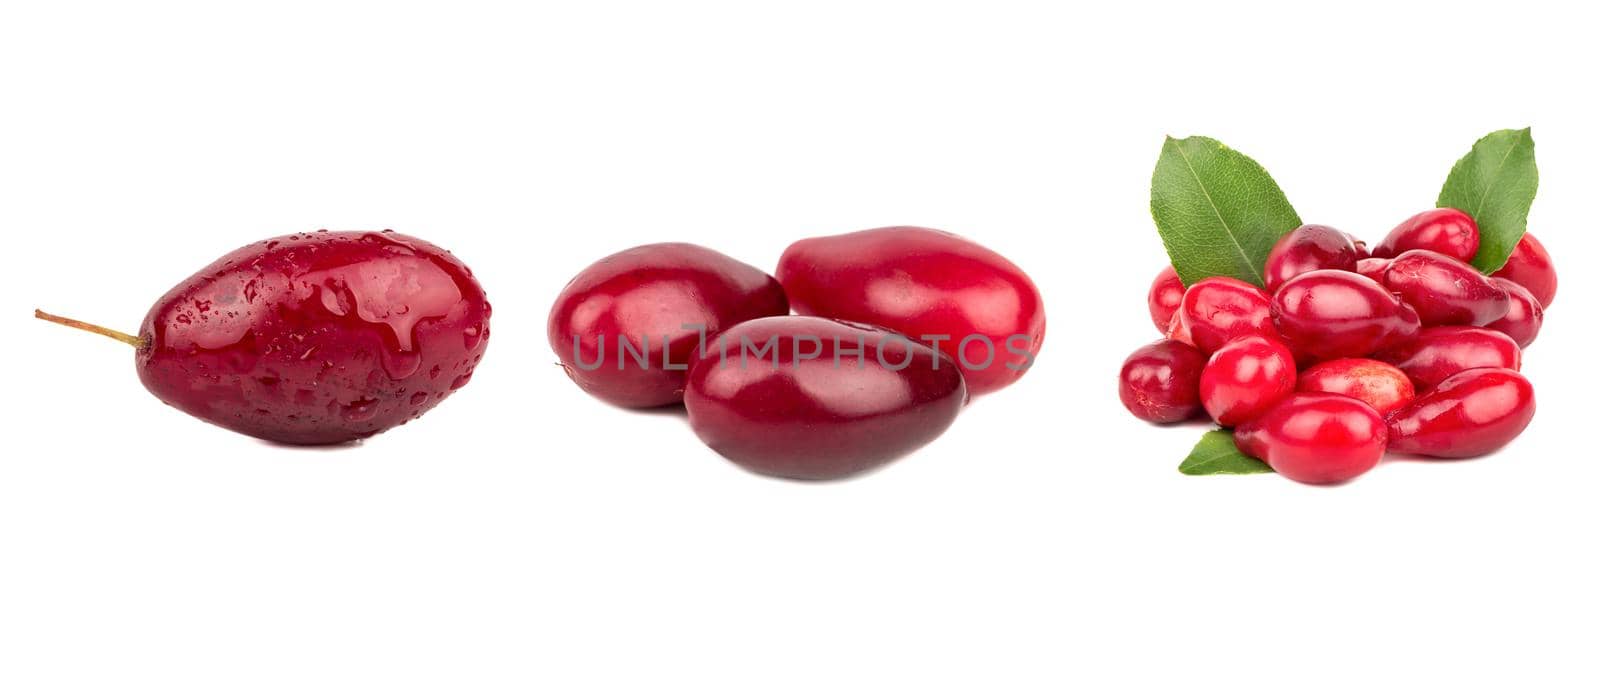 Set of ripe red dogwood berries on white background.